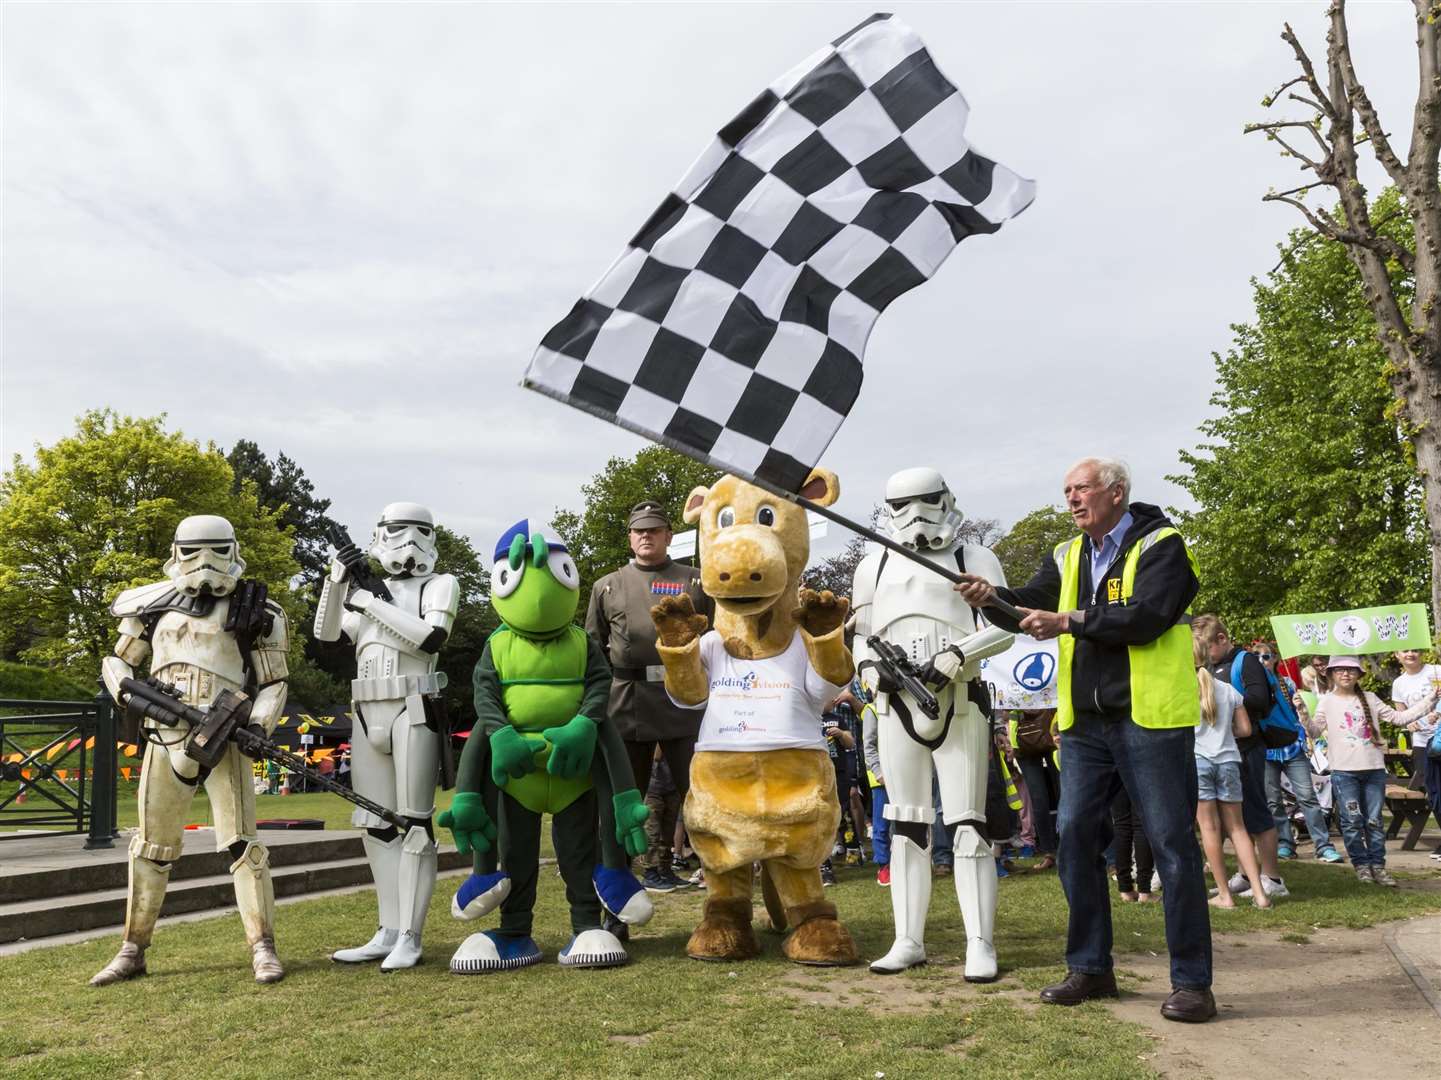 Martin Vye of the KM Charity Team waved the chequered flag while UK Garrison Stormtroopers, Buster Bug, and Gerald Giraffe headed up the record-breaking walking bus. (1969084)